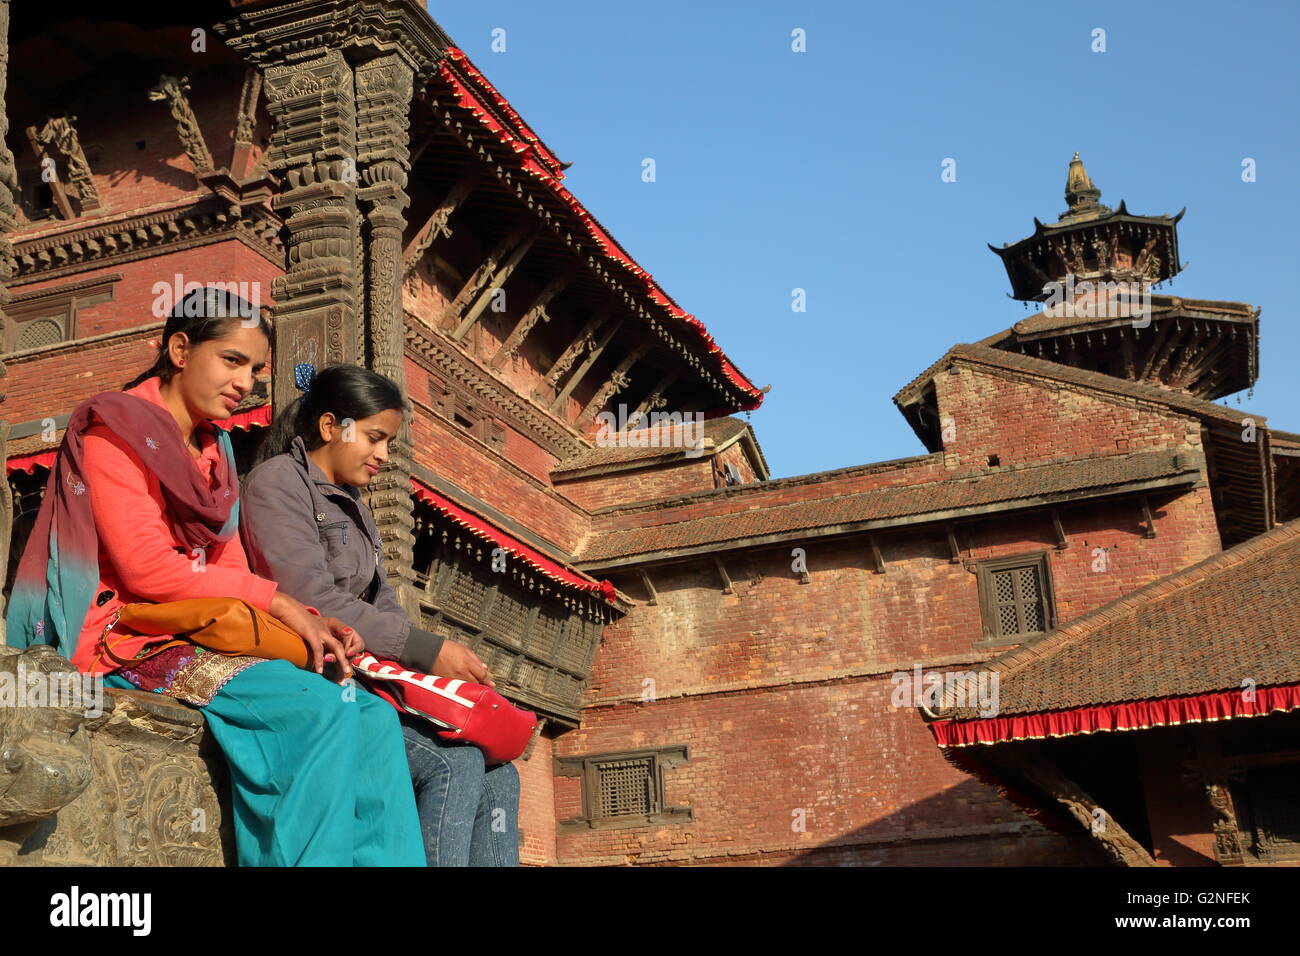 Two young Nepalese women sitting at Durbar Square, Patan, Nepal Stock Photo